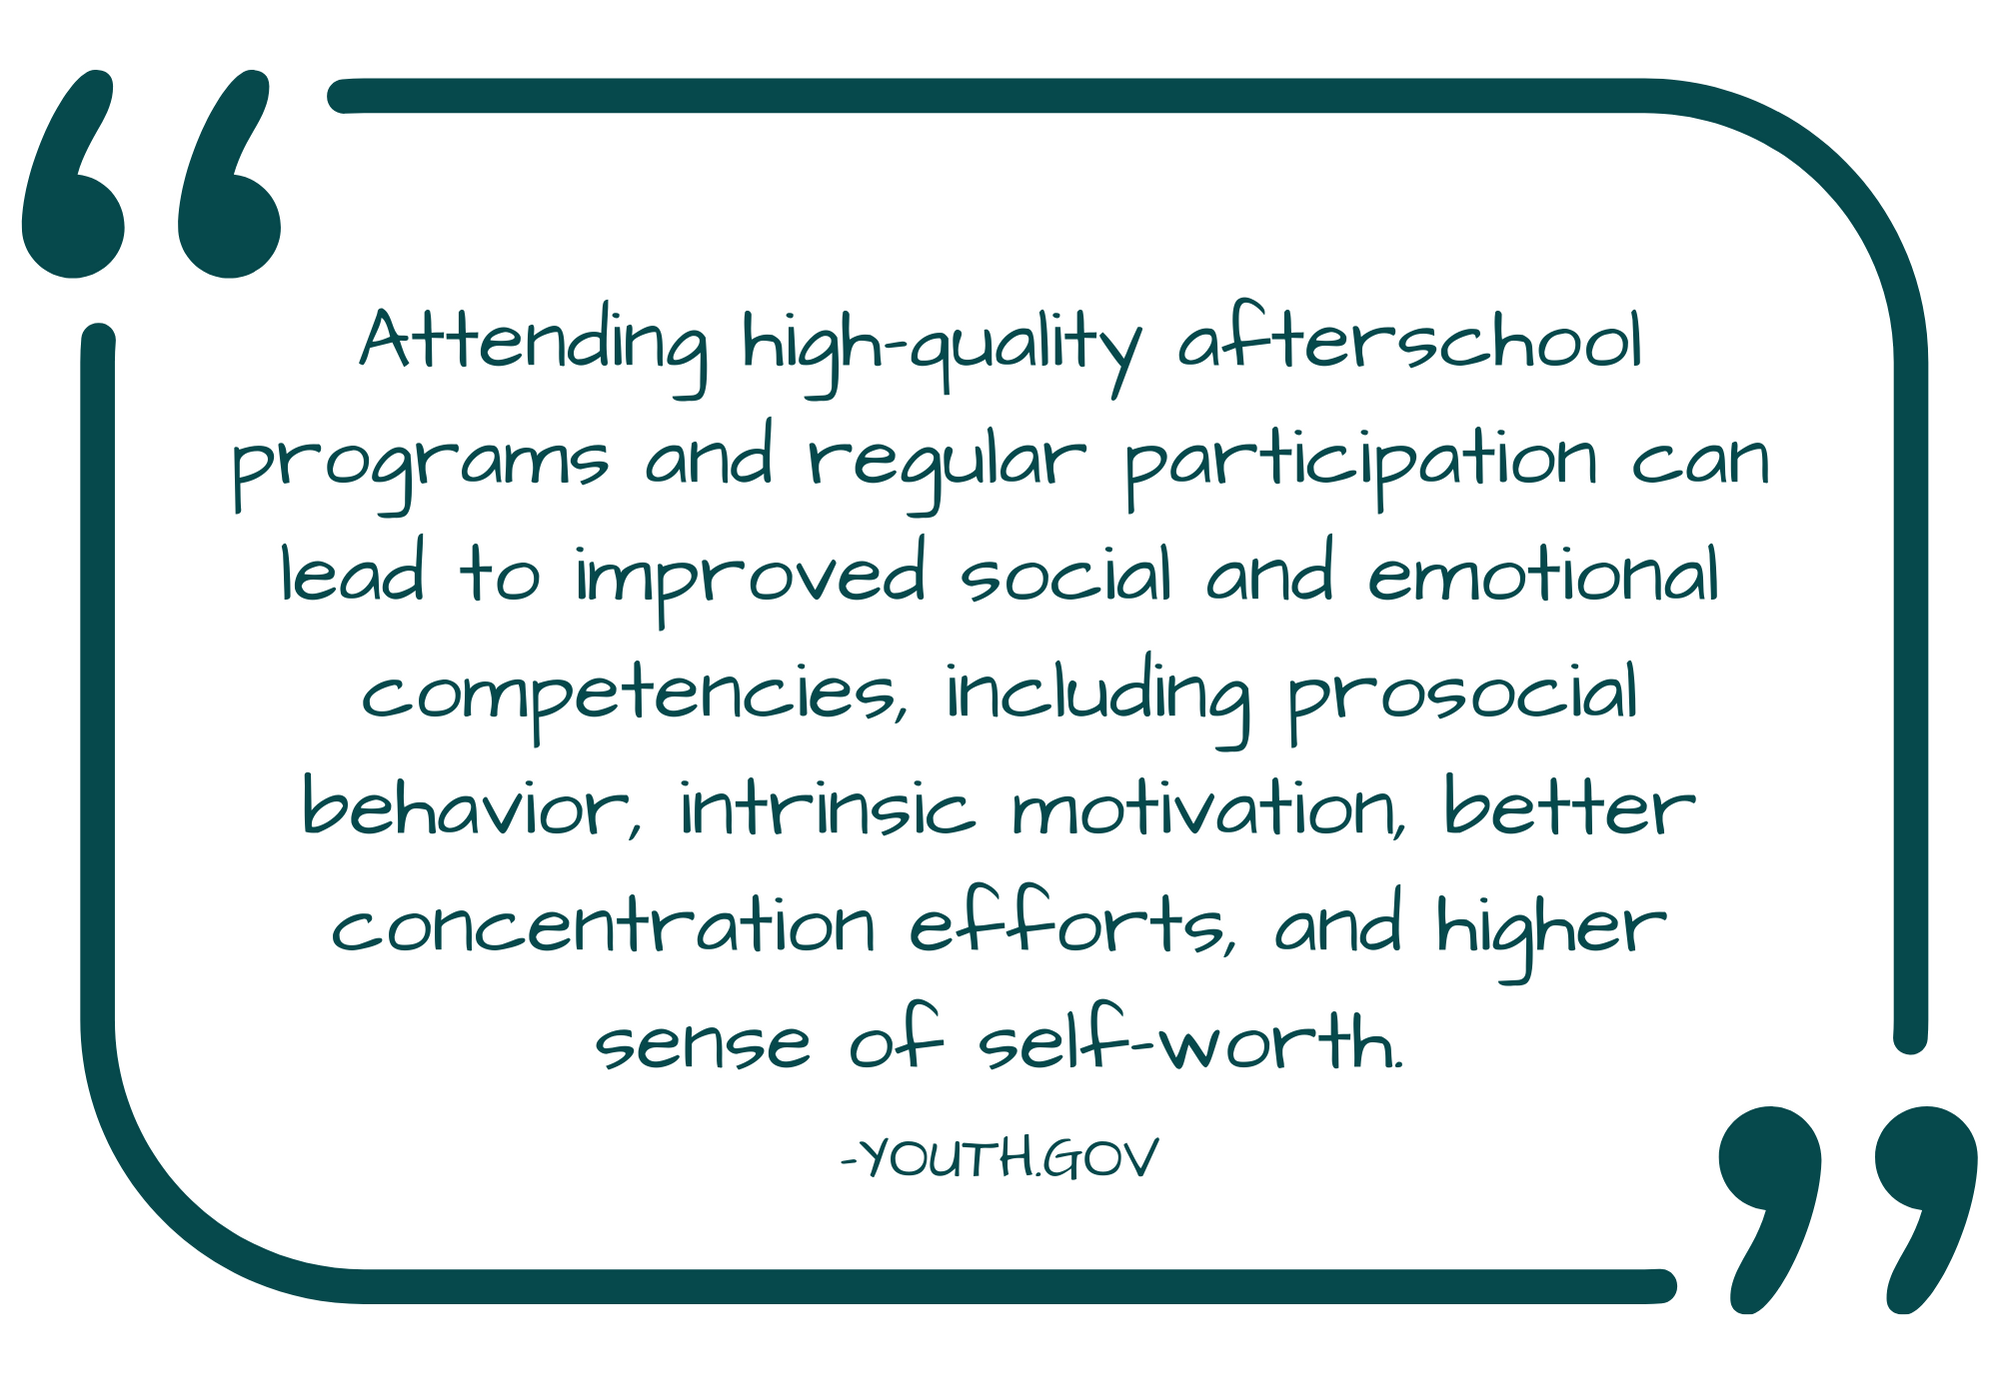 Attending high-quality afterschool programs and regular participation can lead to improved social and emotional competencies, including prosocial behavior, intrinsic motivation, better concentration efforts, and higher sense of self-worth.